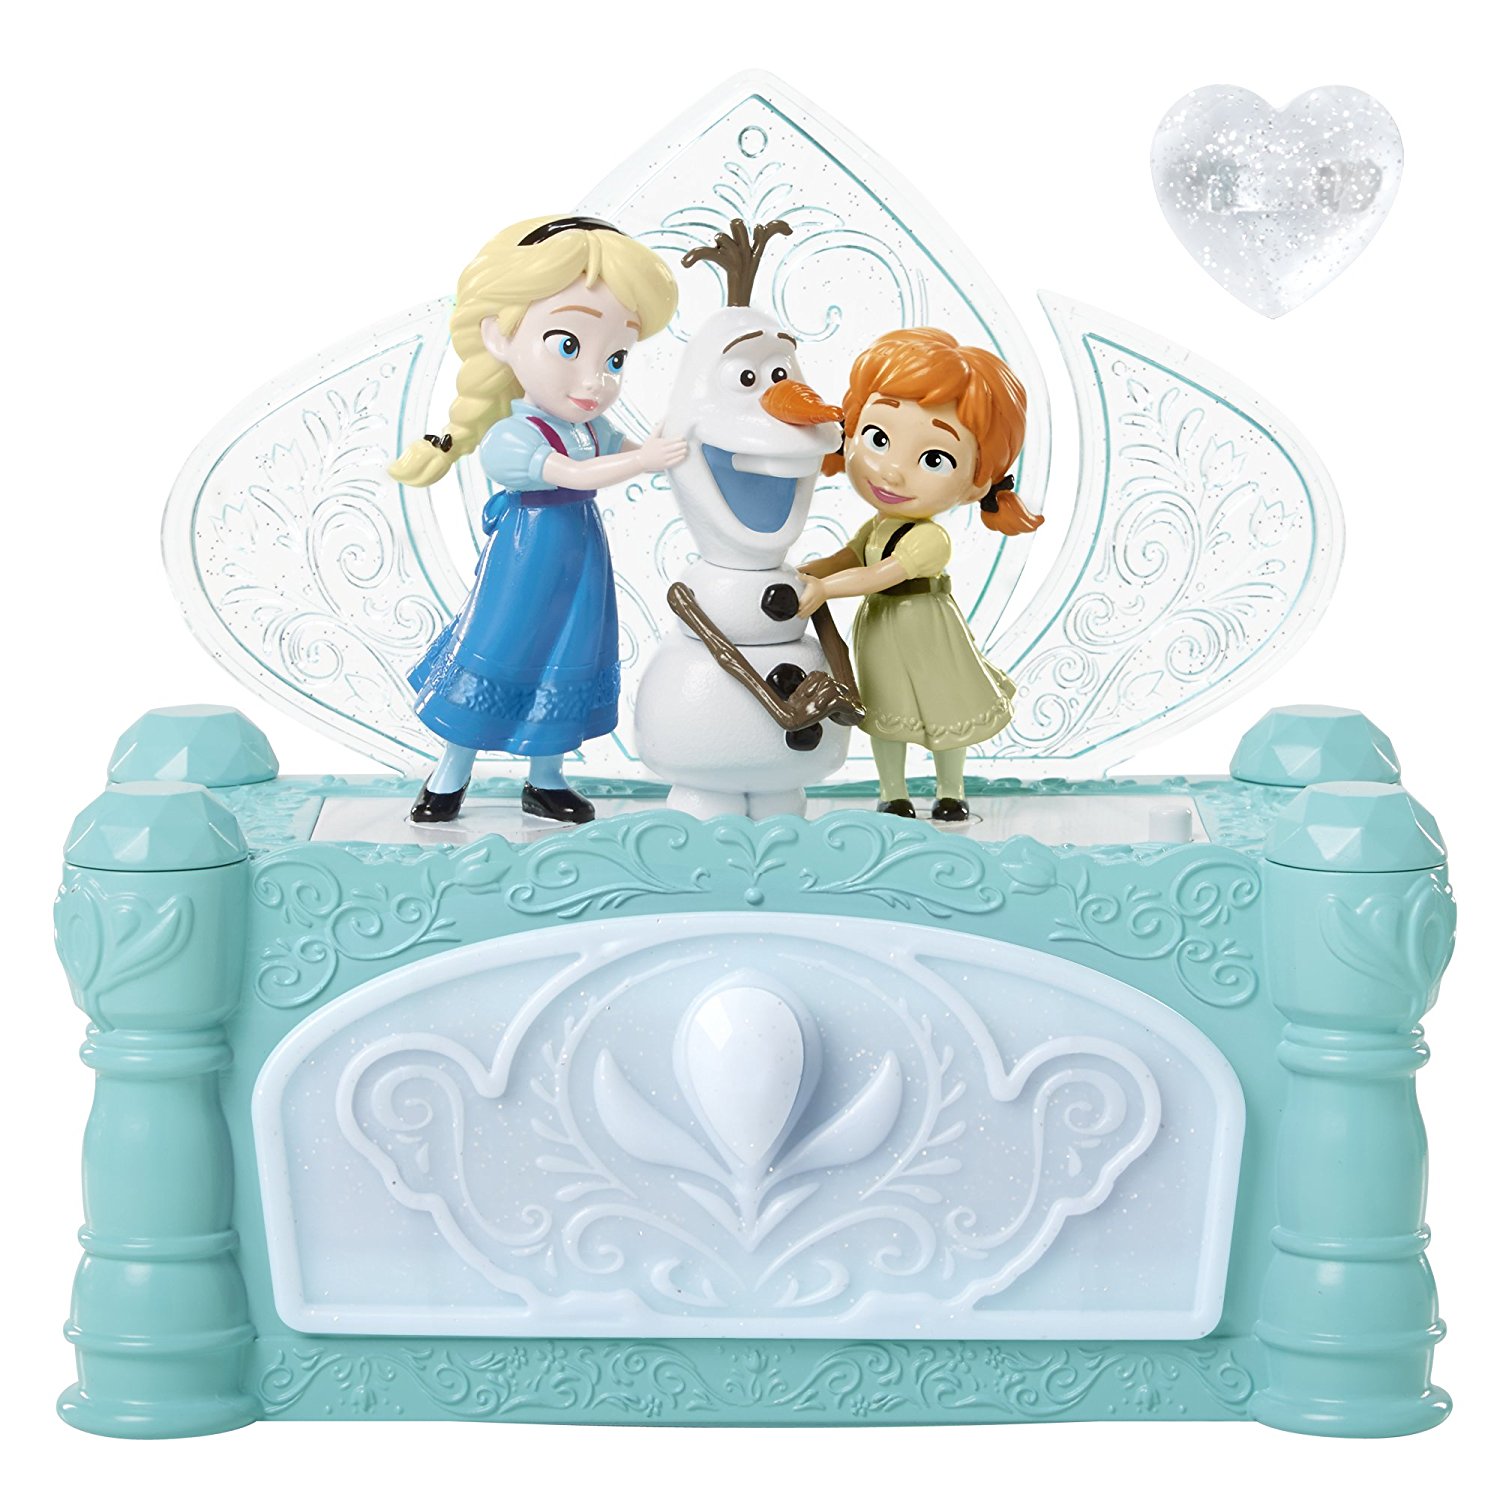 Disney Frozen Do You Want to Build a Snowman Jewelry Box $13.99!